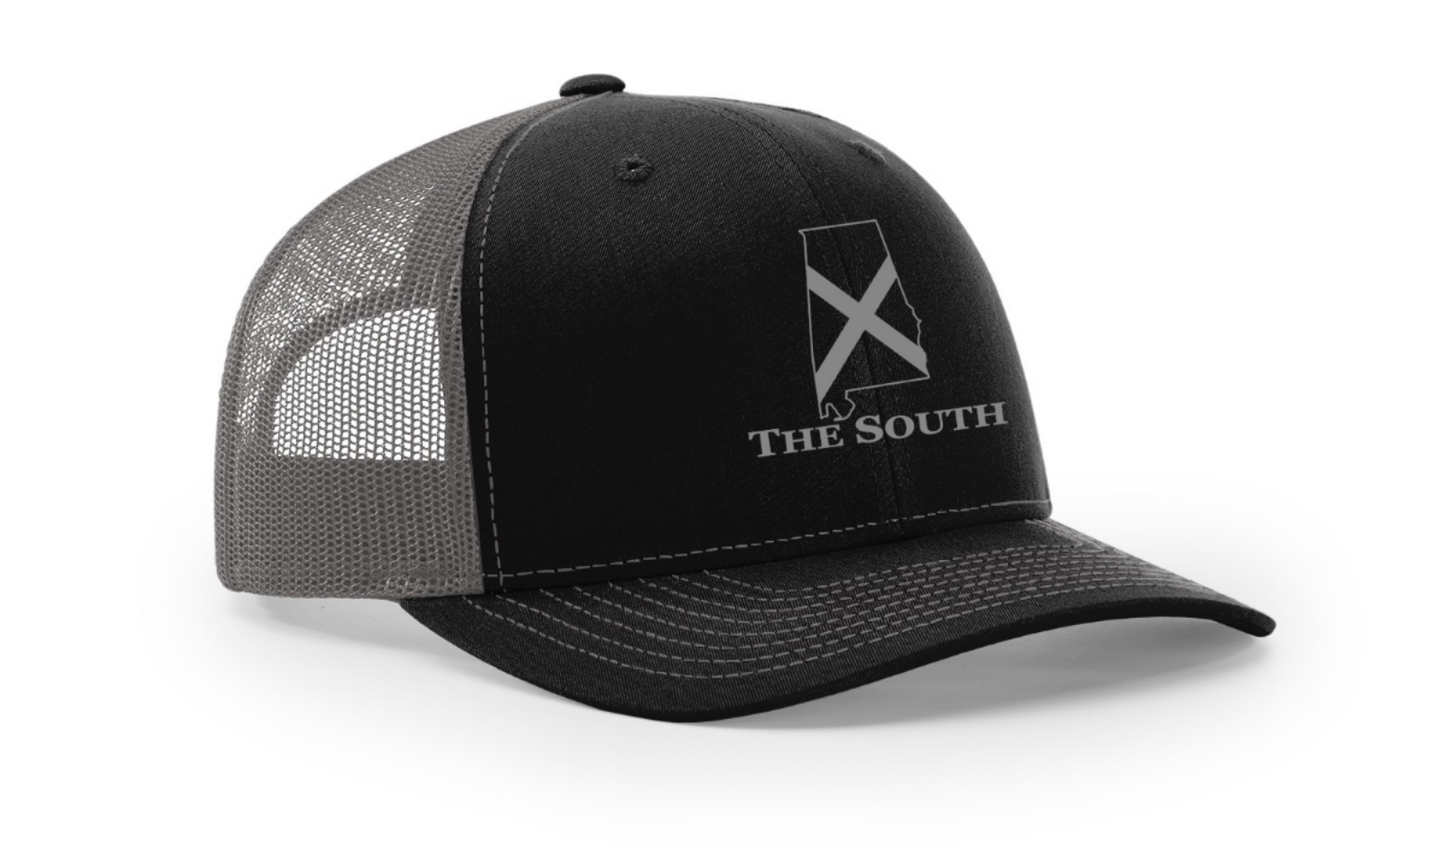 Black/Charcoal/Charcoal - The South